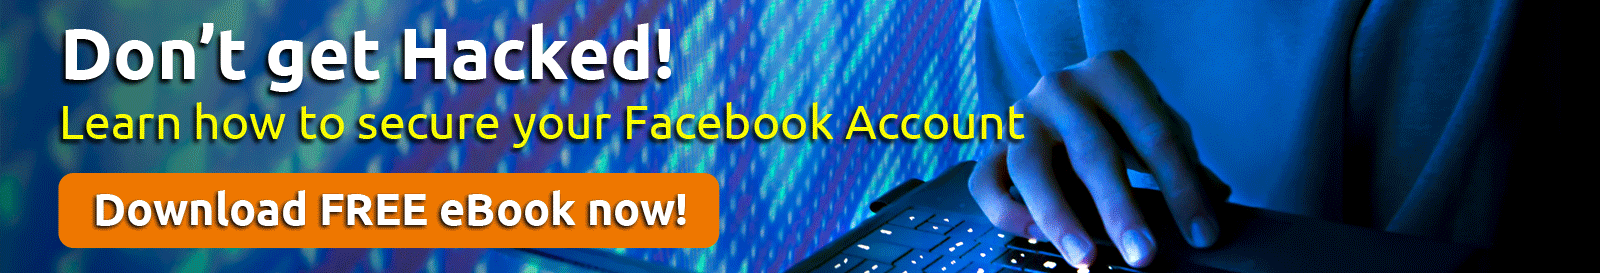 Don't Get Hacked! Learn How to Secure Your Facebook Account